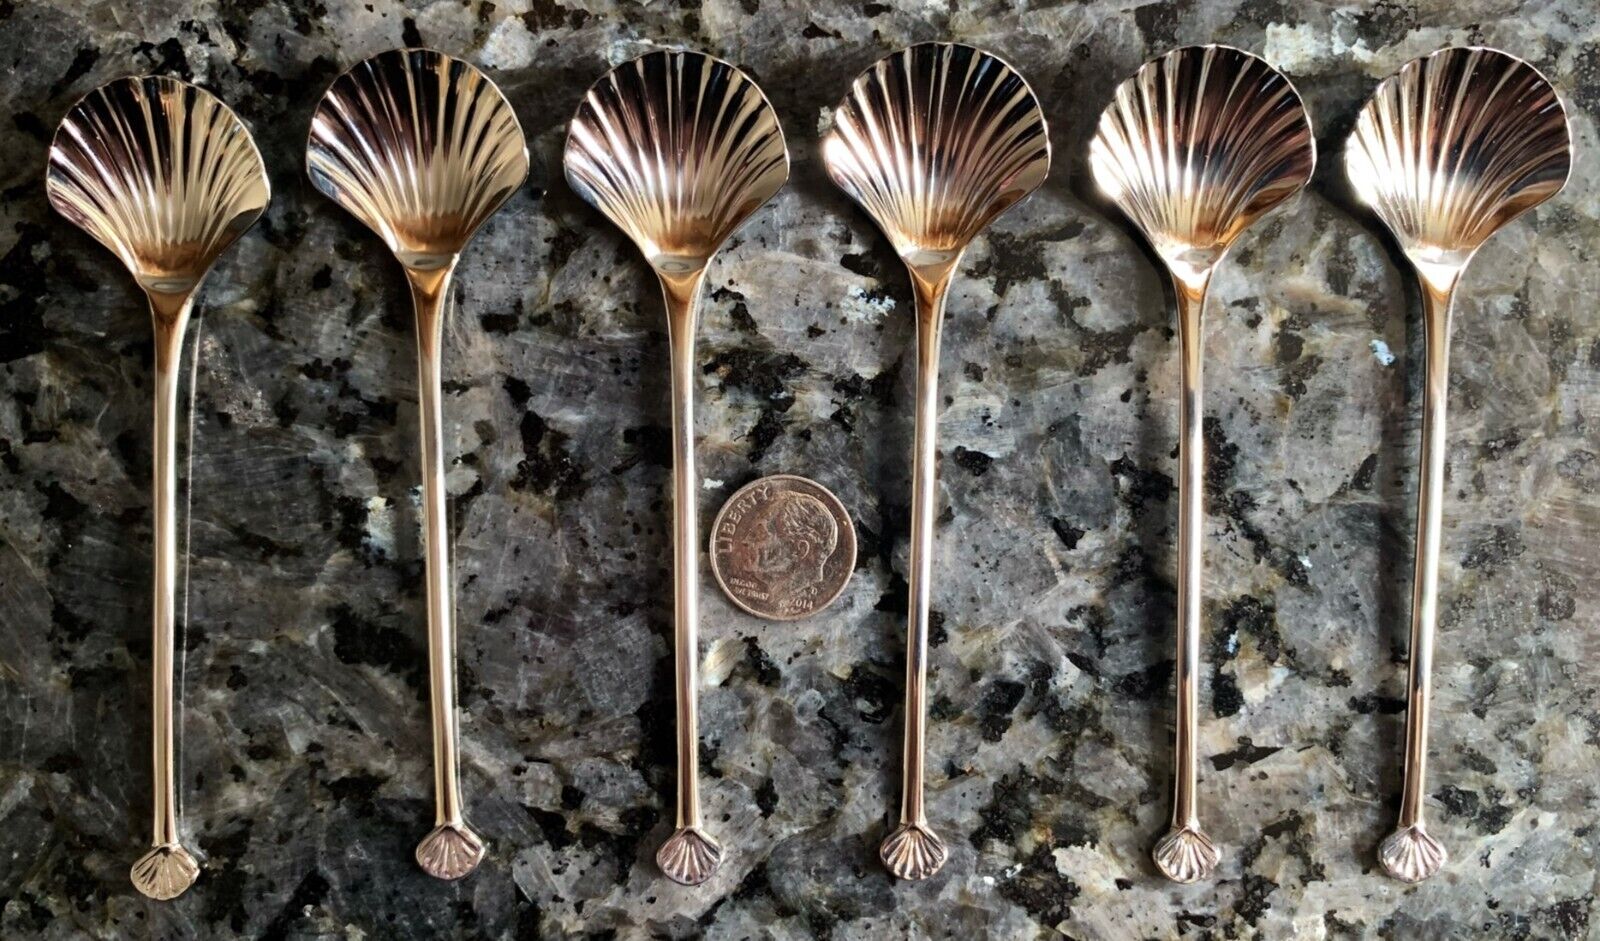 6 Matching Shell-Shaped Demi-Tasse Spoons in Original Box & Packaging